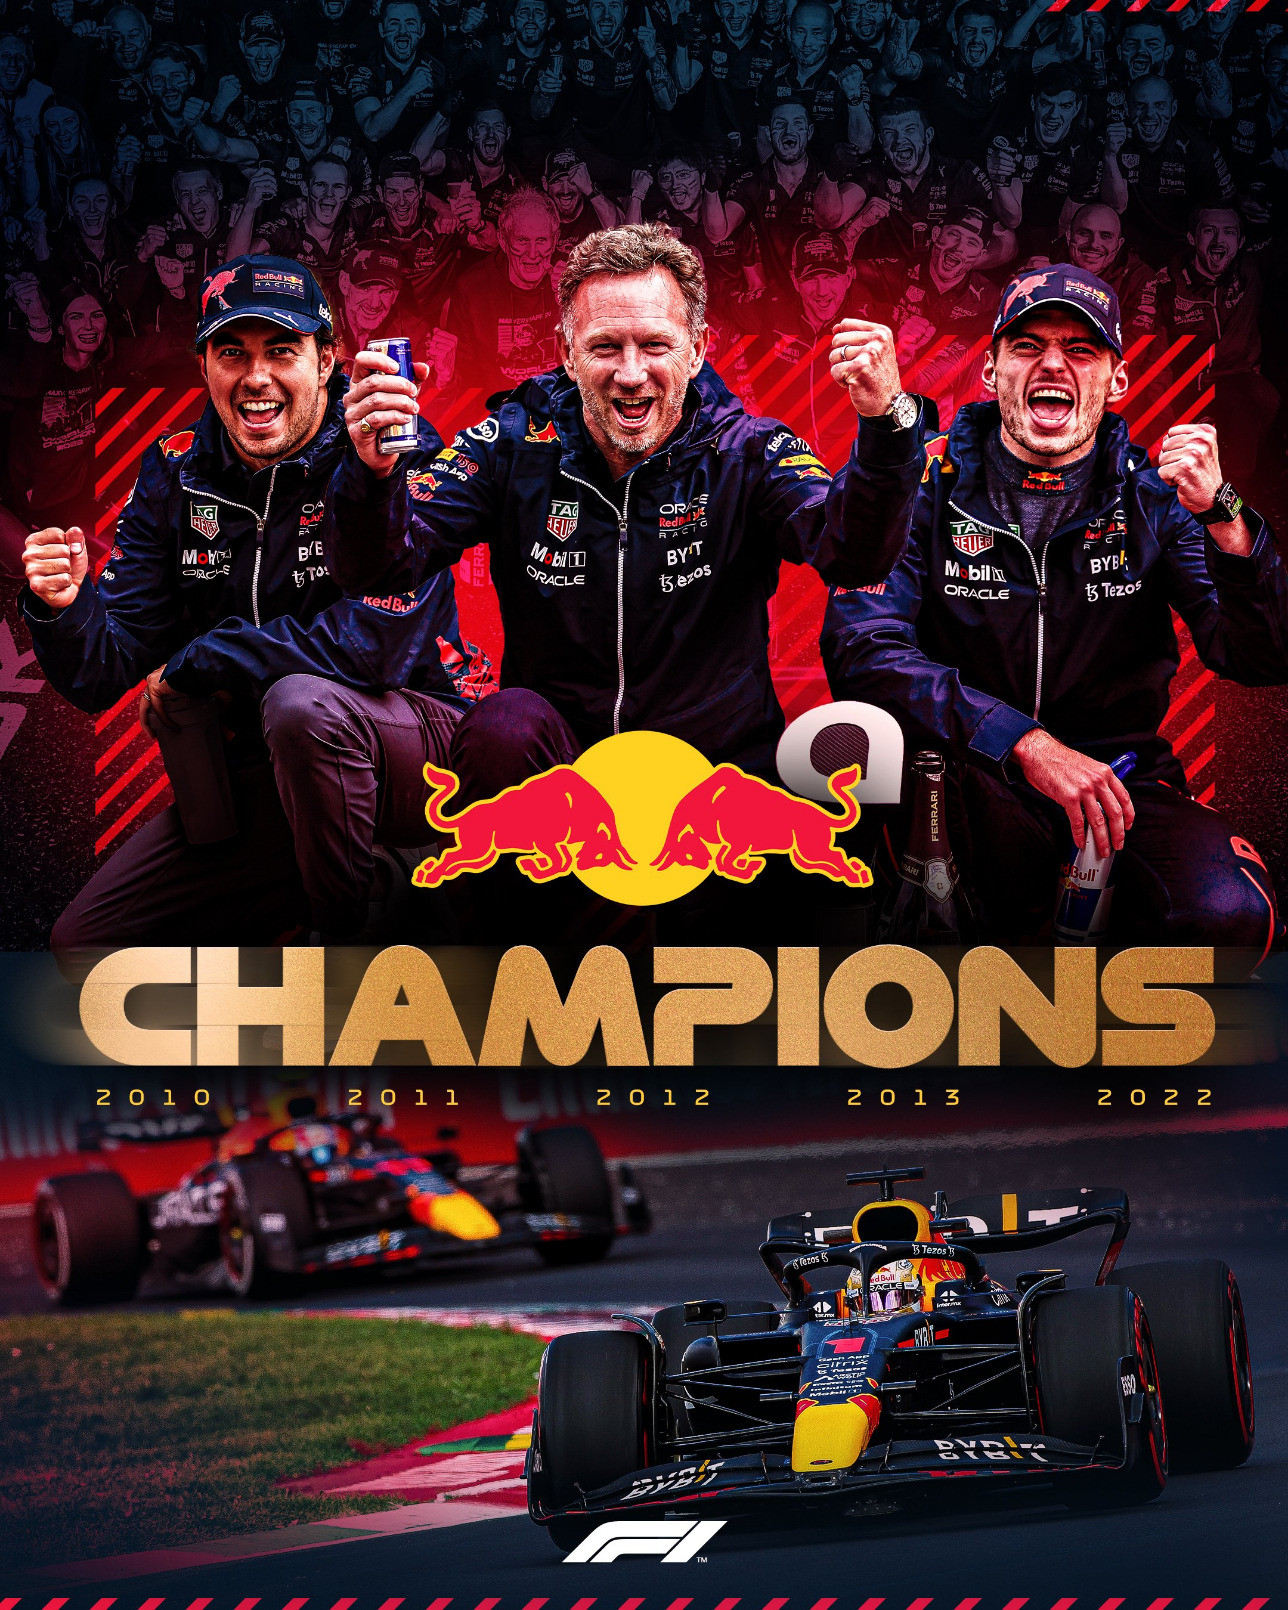 The day after the co-founder of Red Bull Dietrich Mateschitz passed away, his team, his Red Bull Racing team come out and with Max Verstappen at the wheel win the United States Grand Prix and win the Constructors Championship of 2022, a superb drive with a dominant season for Max Verstappen. 